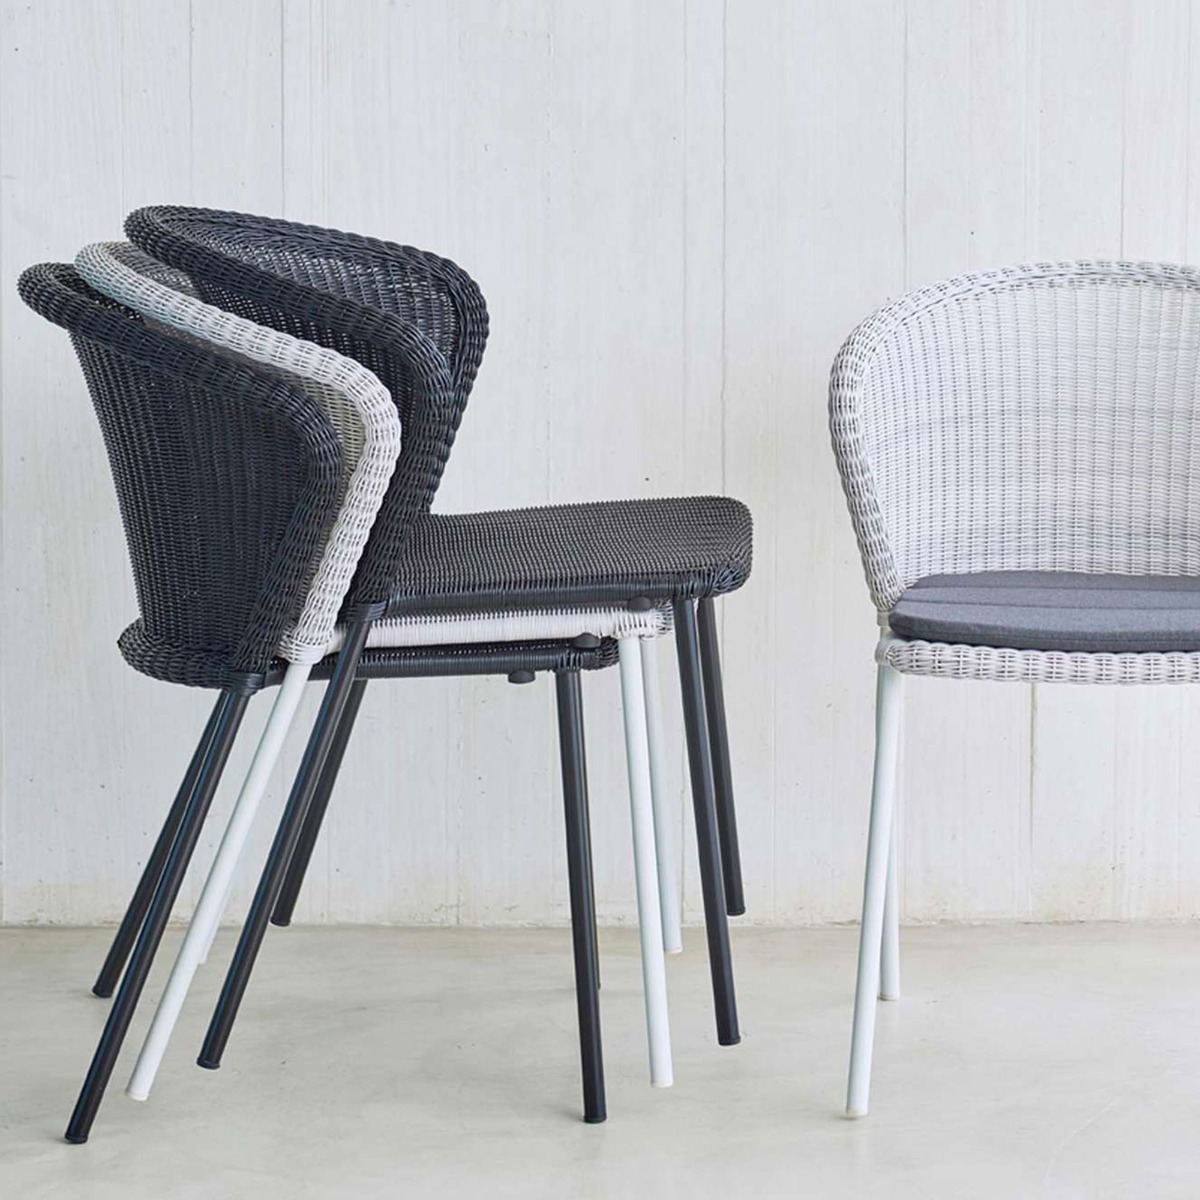 Cane Line Lean Chair With Cushion, Grey | Barker & Stonehouse